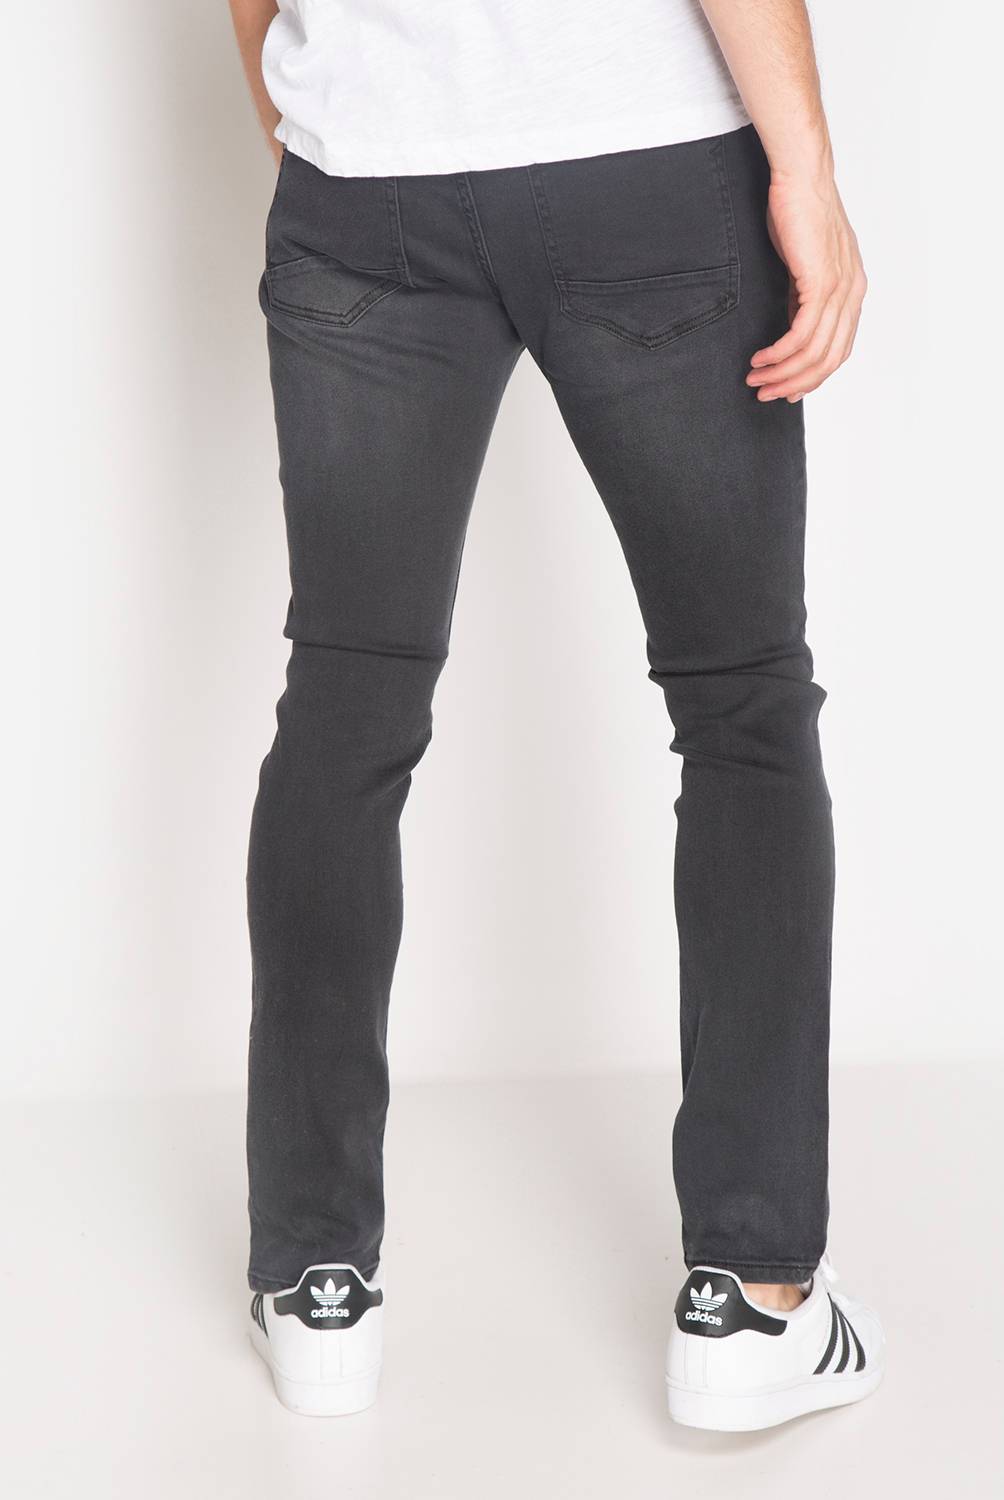 Americanino - Jeans Casual Skinny Fit